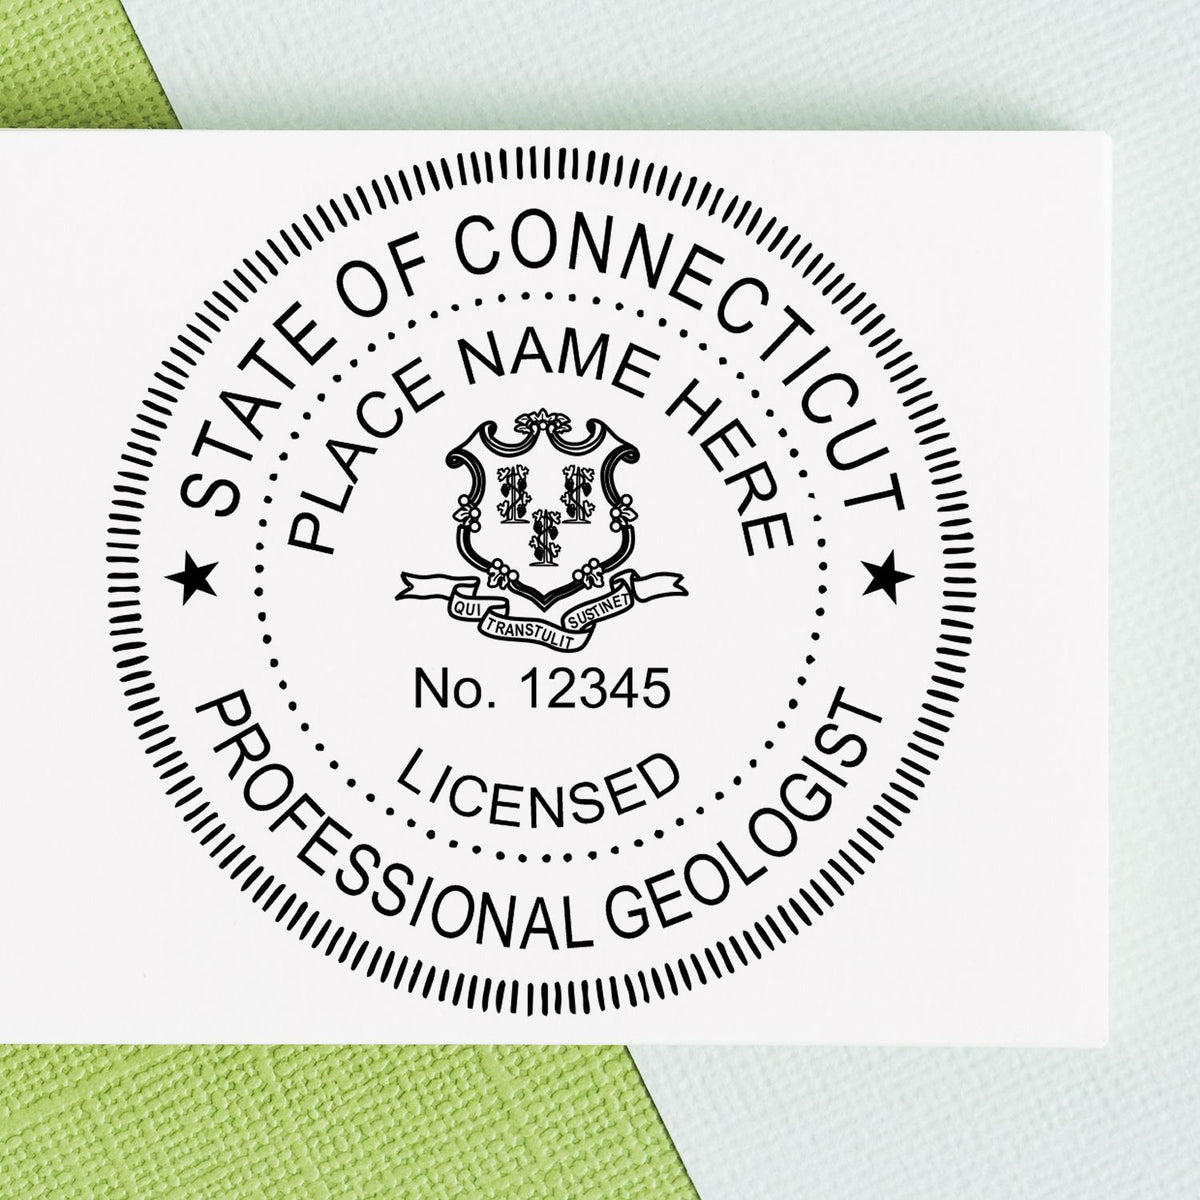 The Connecticut Professional Geologist Seal Stamp stamp impression comes to life with a crisp, detailed image stamped on paper - showcasing true professional quality.